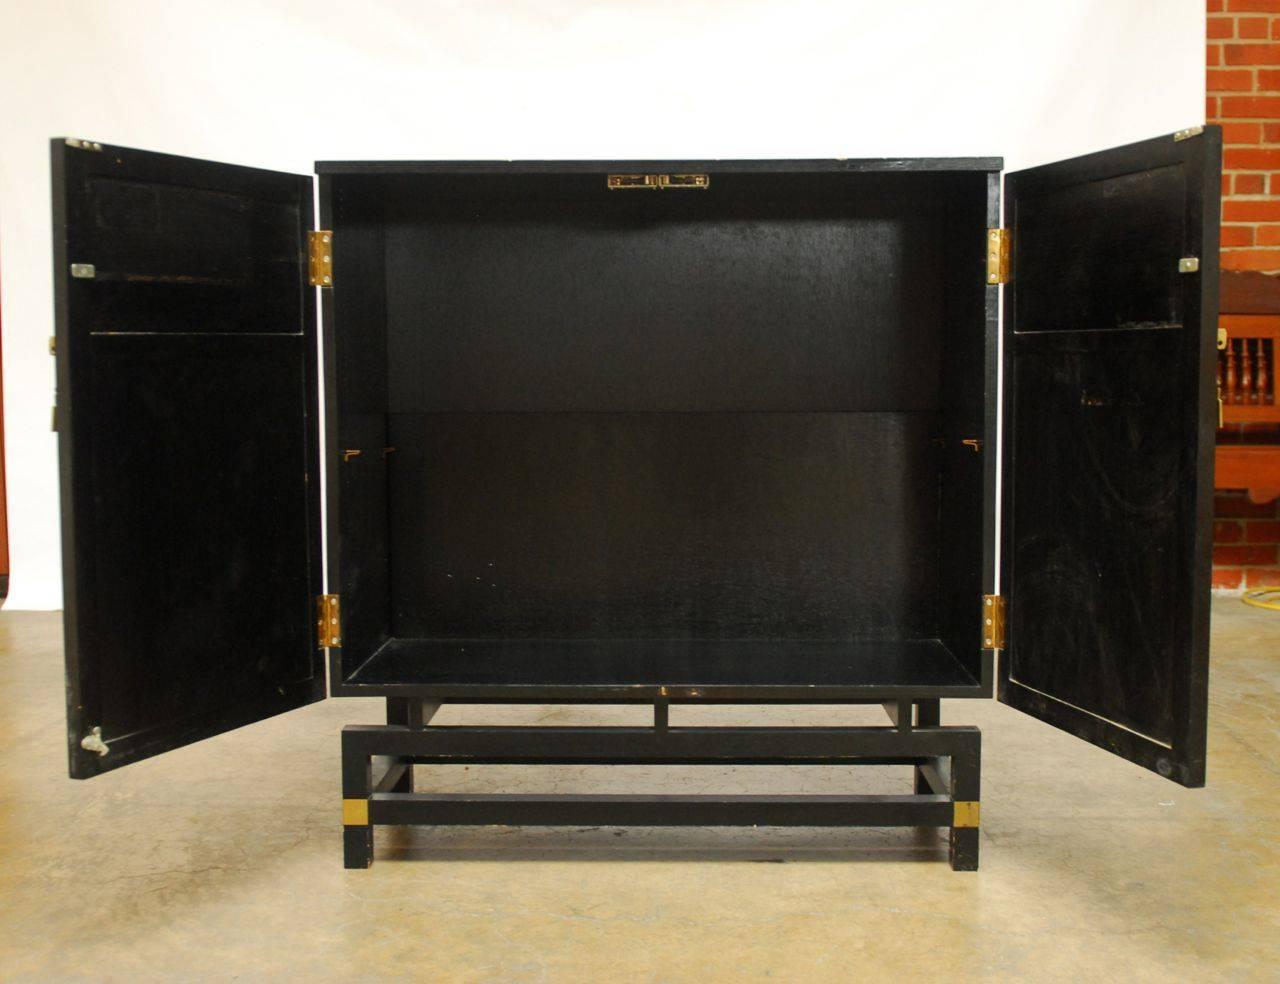 Impressive black lacquer cabinet made with antique parcel-gilt panels mounted onto the two front doors. Intricately carved shrine panels decorated with red lacquer and gilt. The cabinet is supported by an open stretchered Stand with brass accents